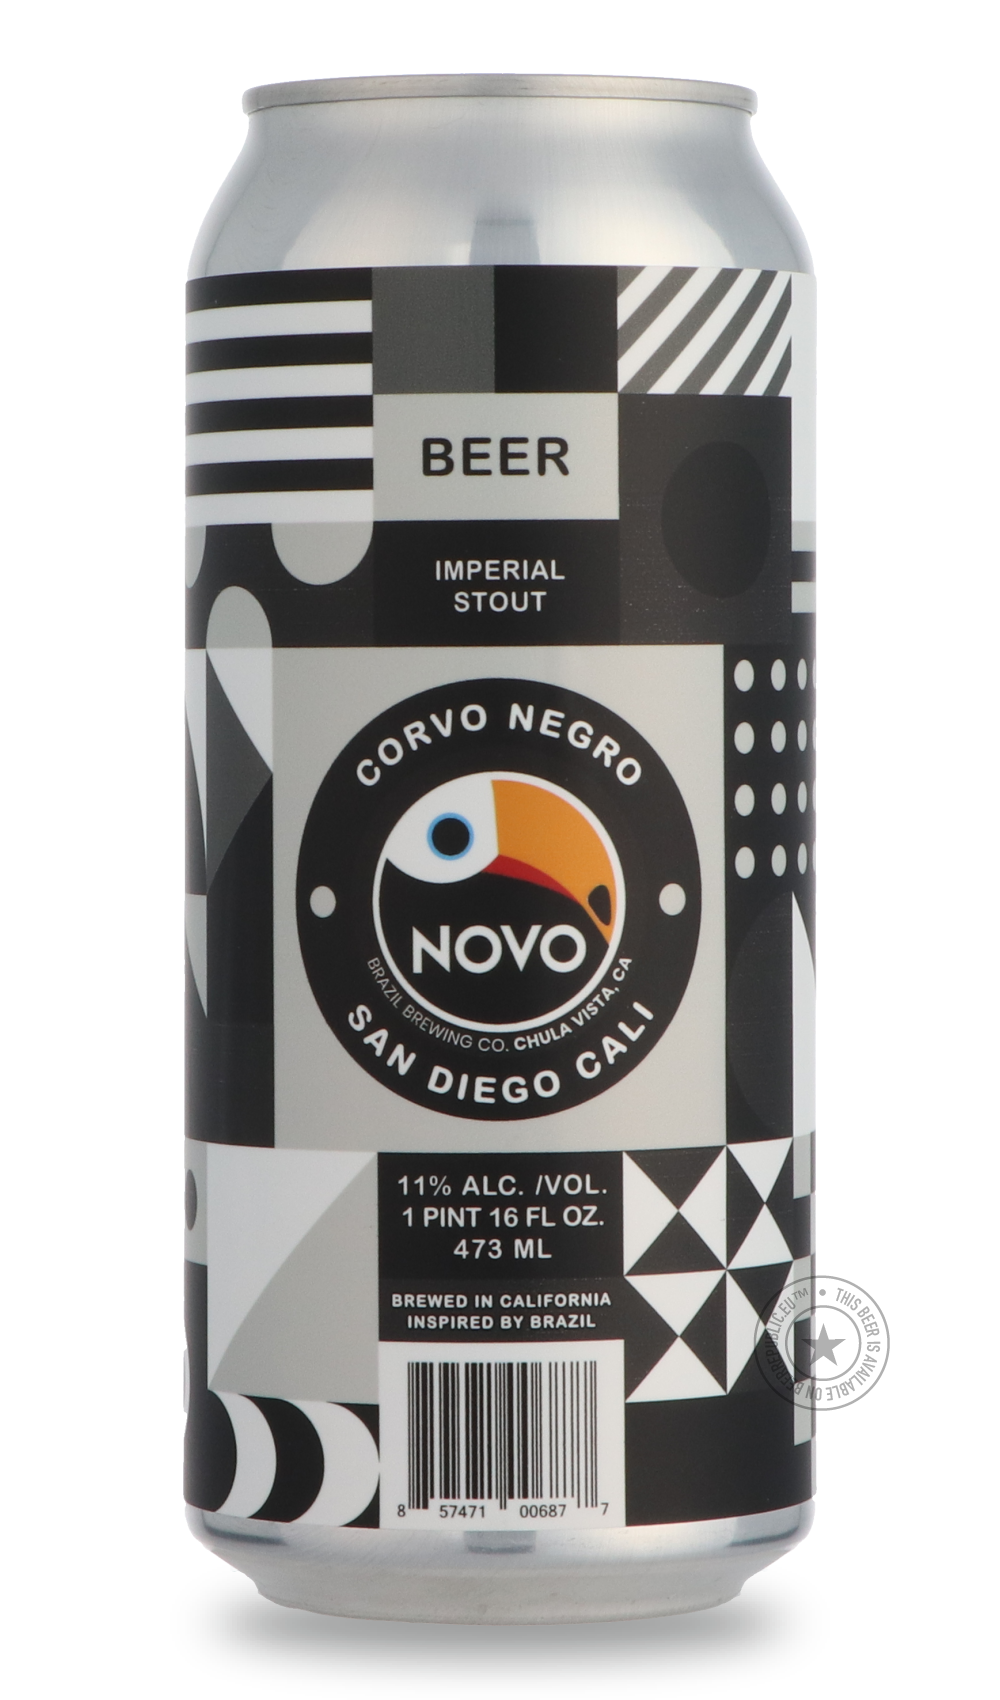 -Novo Brazil- Corvo Negro-Stout & Porter- Only @ Beer Republic - The best online beer store for American & Canadian craft beer - Buy beer online from the USA and Canada - Bier online kopen - Amerikaans bier kopen - Craft beer store - Craft beer kopen - Amerikanisch bier kaufen - Bier online kaufen - Acheter biere online - IPA - Stout - Porter - New England IPA - Hazy IPA - Imperial Stout - Barrel Aged - Barrel Aged Imperial Stout - Brown - Dark beer - Blond - Blonde - Pilsner - Lager - Wheat - Weizen - Ambe